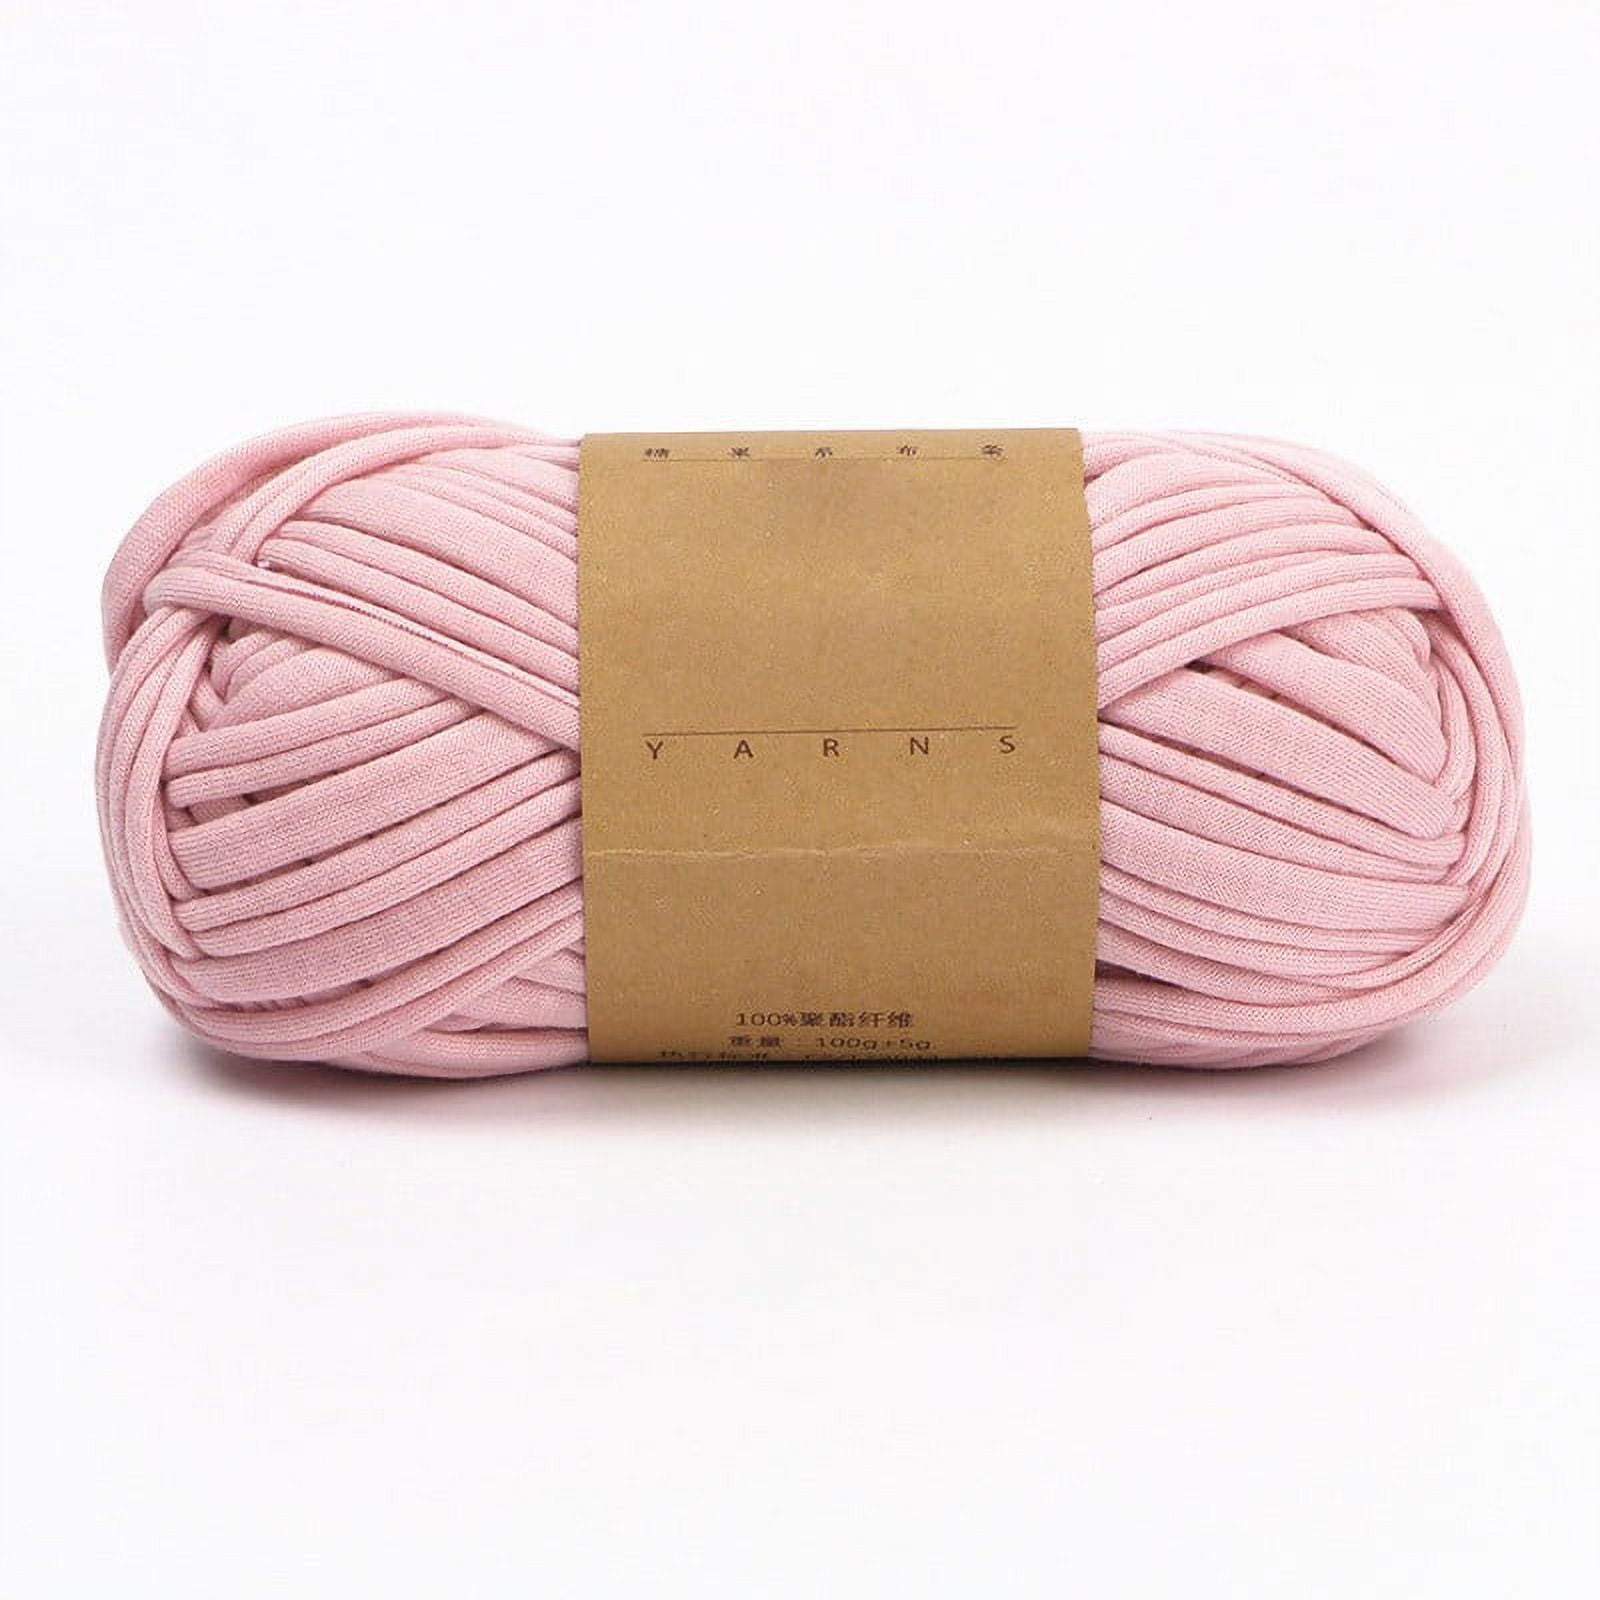  60g Pink Yarn for Crocheting and Knitting;66m (72yds) Cotton  Yarn for Beginners with Easy-to-See Stitches;Worsted-Weight Medium  #4;Cotton-Nylon Blend Yarn for Beginners Crochet Kit Making